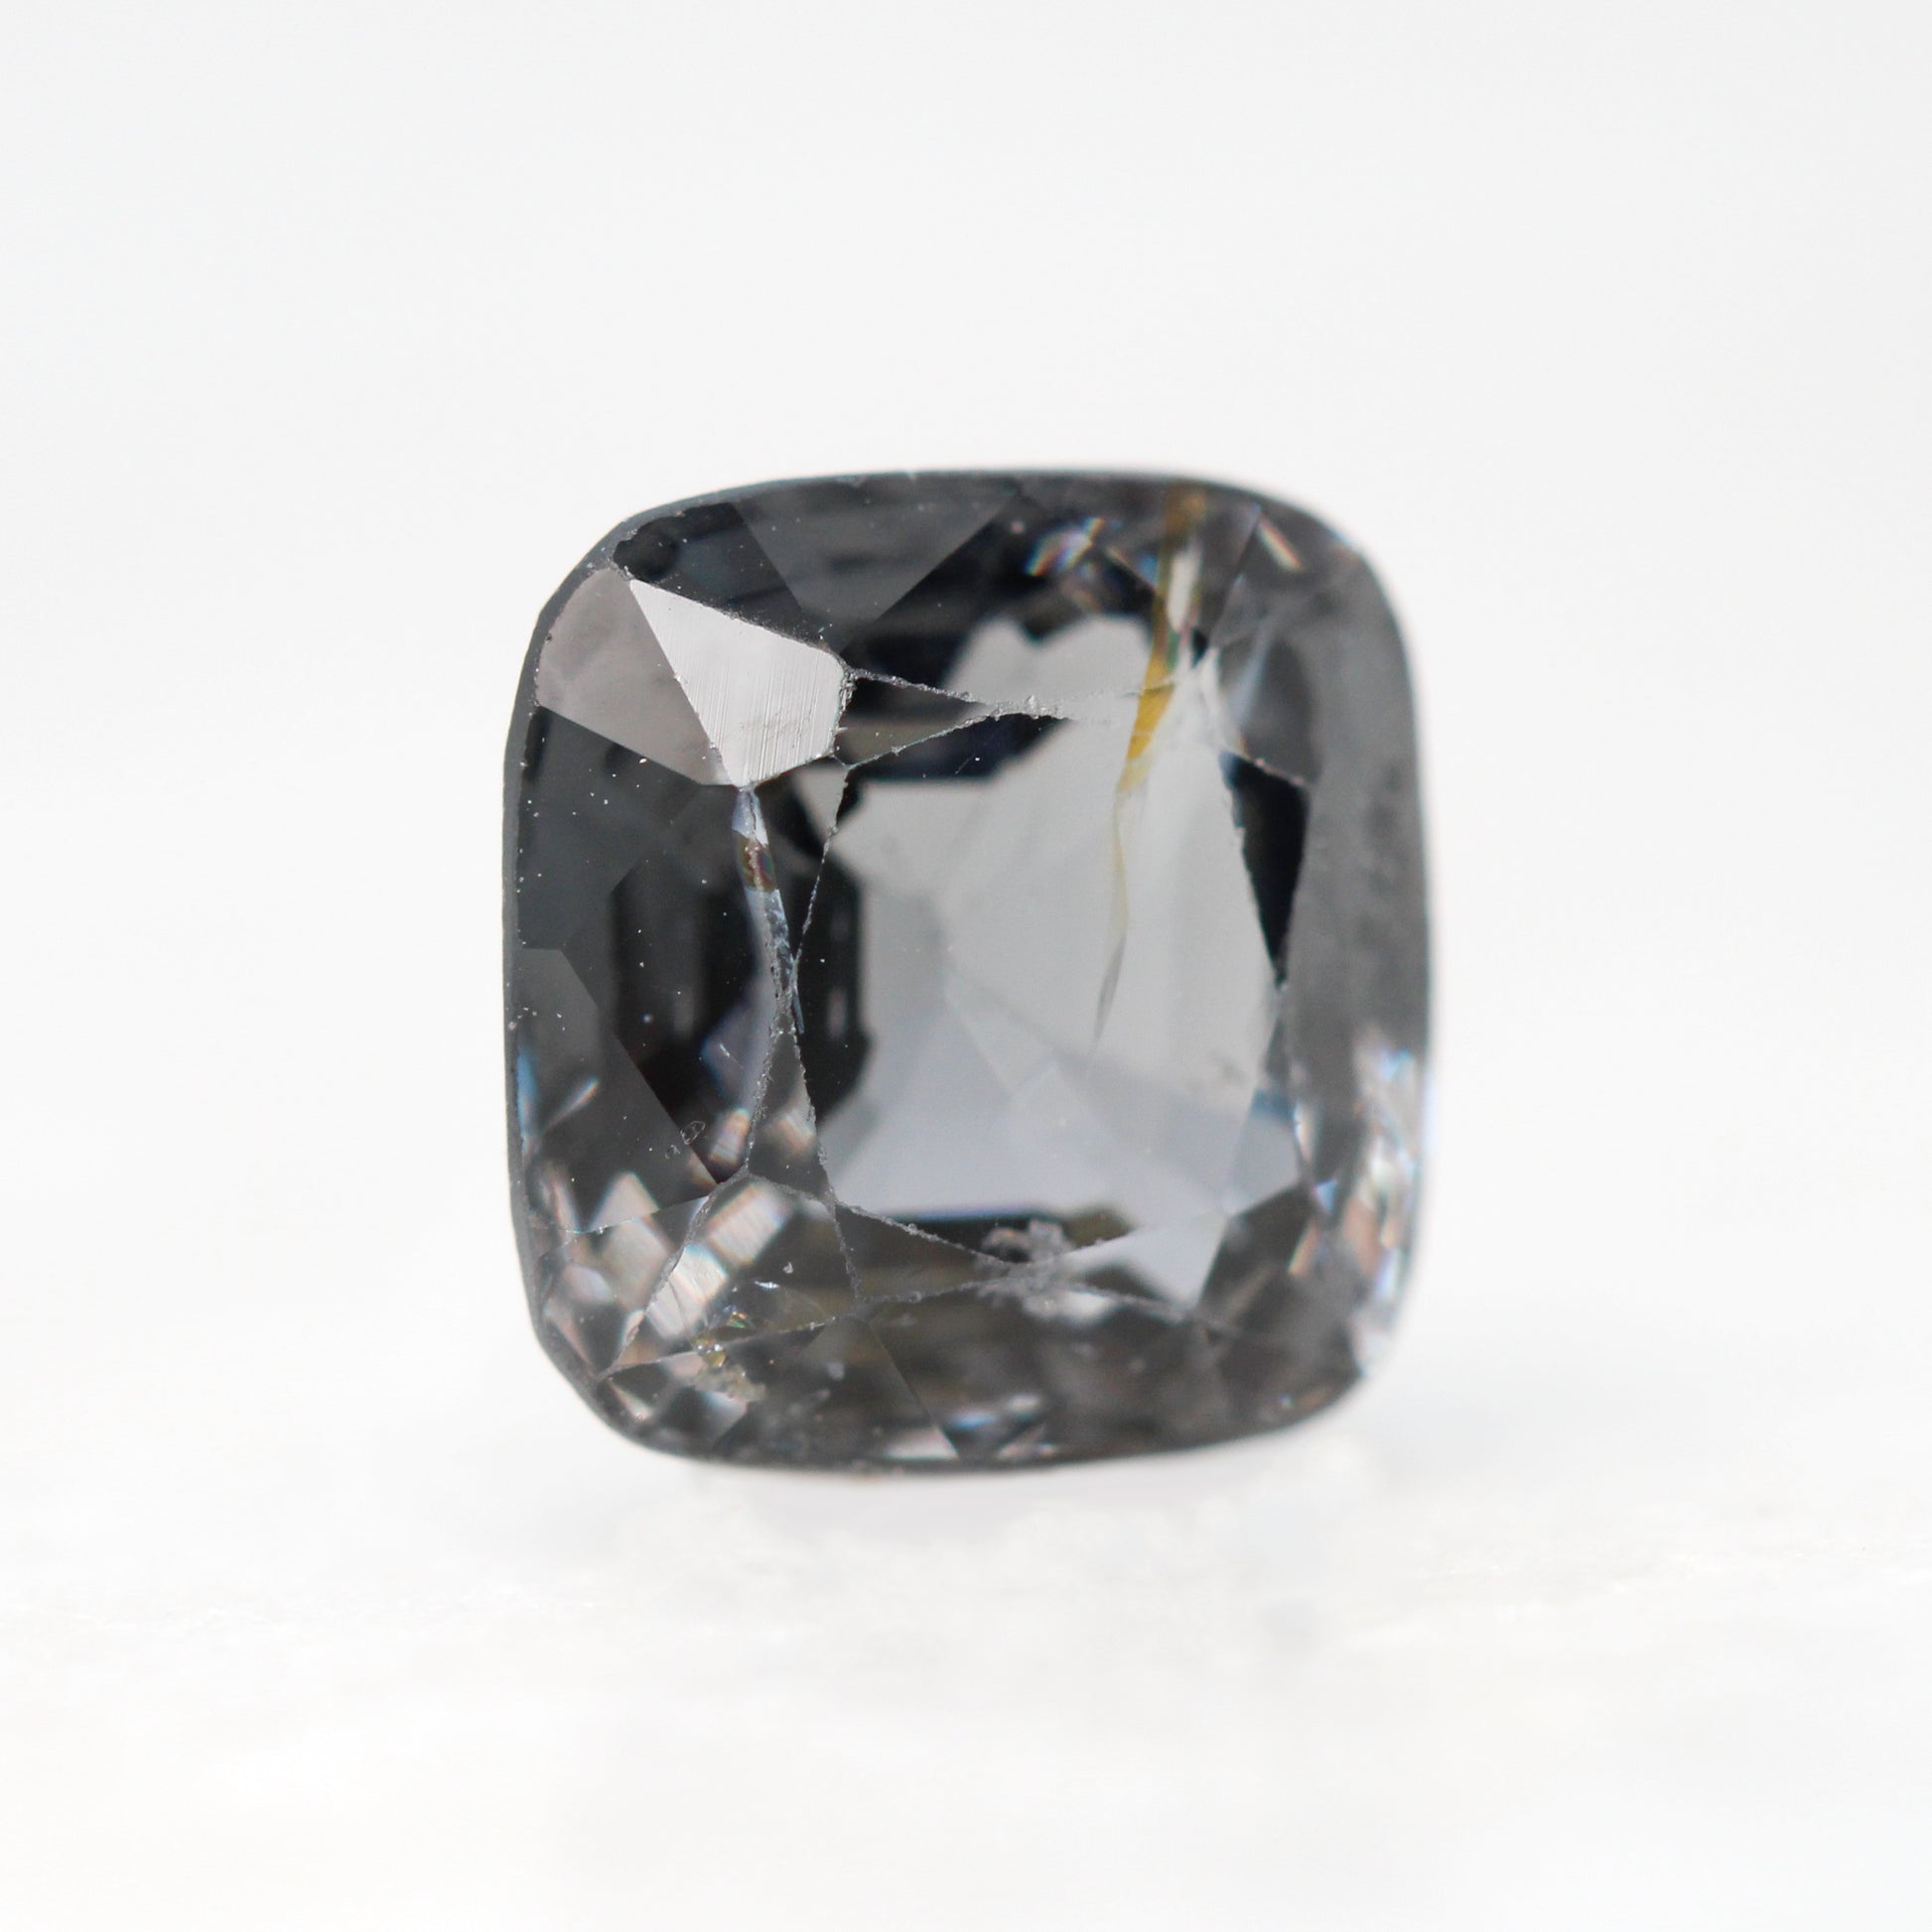 2.90 Carat Gray Cushion Cut Spinel for Custom Work - Inventory Code GCSP290 - Midwinter Co. Alternative Bridal Rings and Modern Fine Jewelry